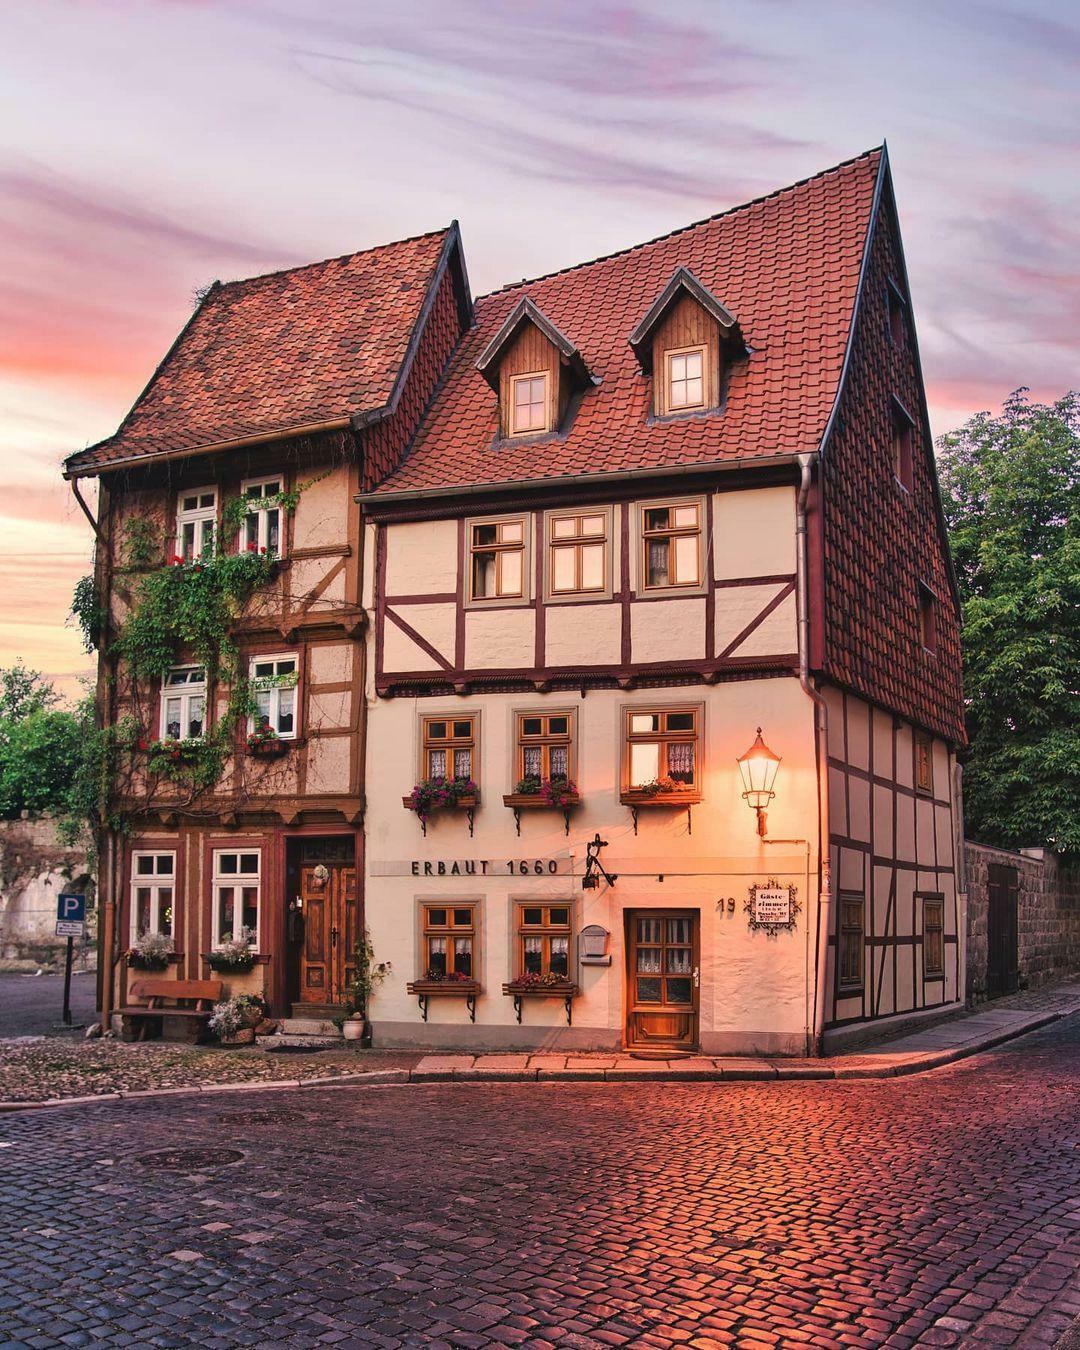 Two 17th Century Half-Timbered Houses At Hohe Straße 18 And 19 In Quedlinburg, One Of The Best-Preserved Medieval And Renaissance Towns In Europe That Escaped Major Damage During World War II. Harz, Saxony-Anhalt, Germany